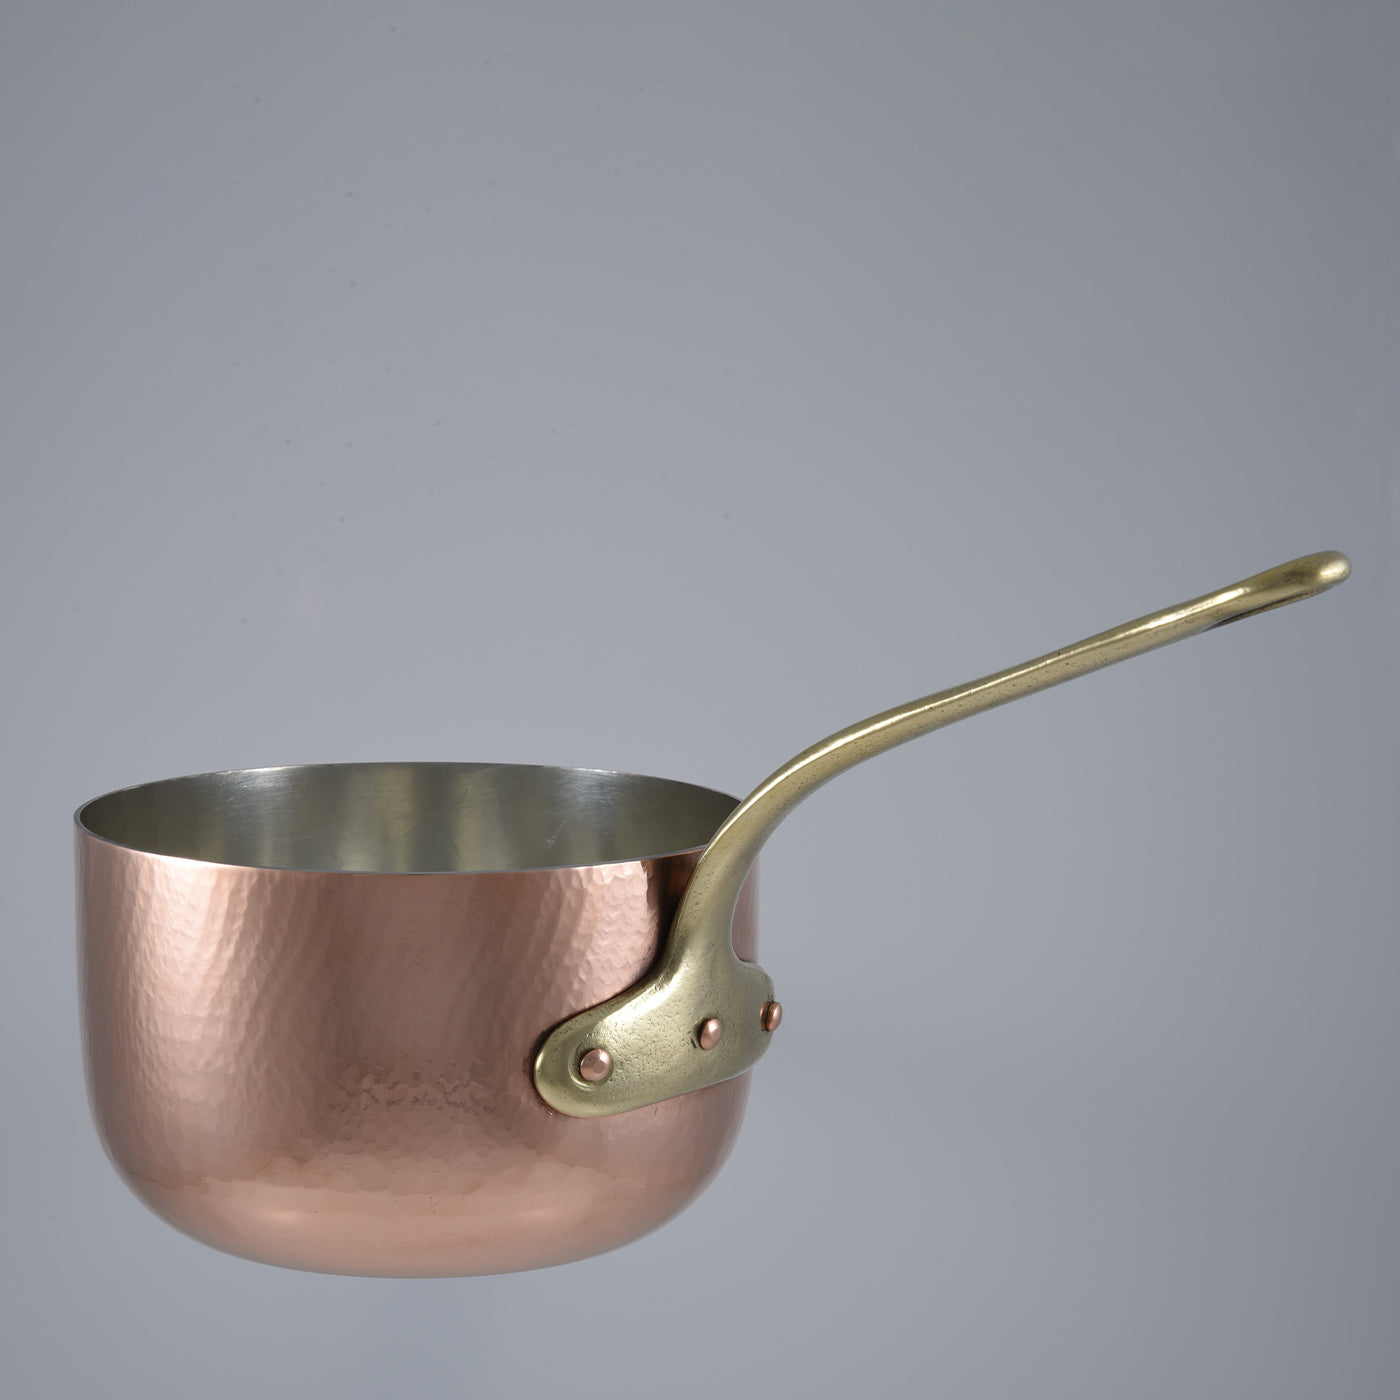 Silver lined Copper Saucepan Dish with Lid - Alternative view 1